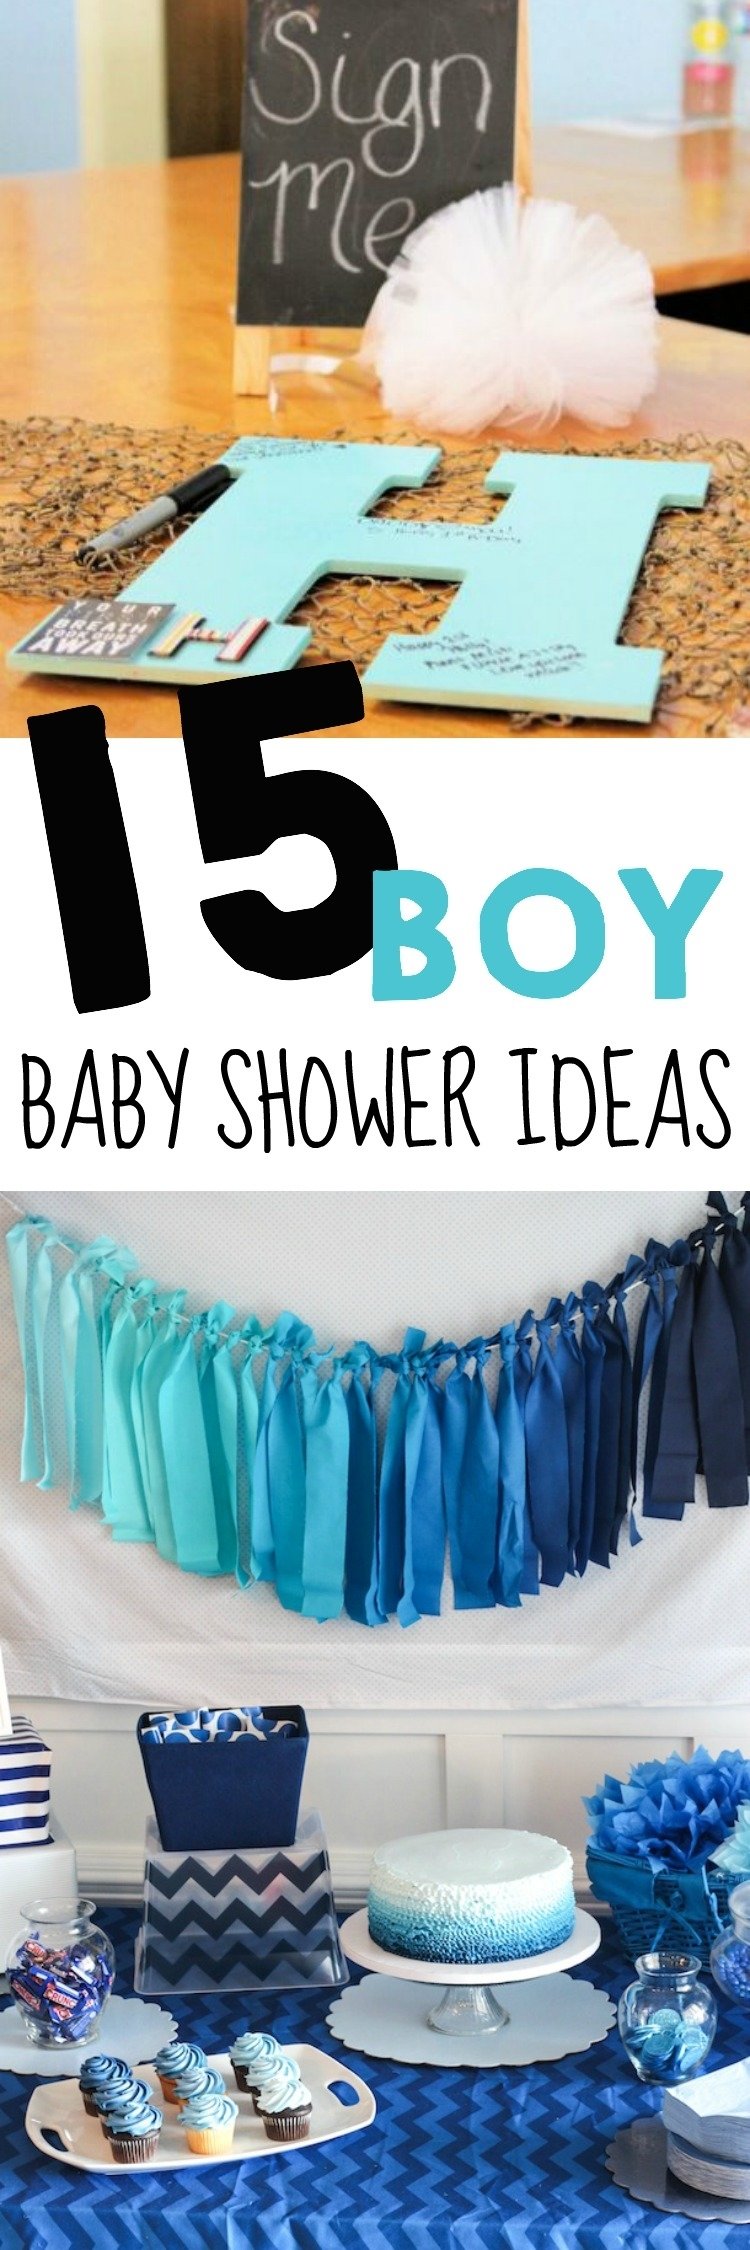 10 Trendy Baby Shower For Boys Ideas 15 baby shower ideas for boys the realistic mama 2 2022